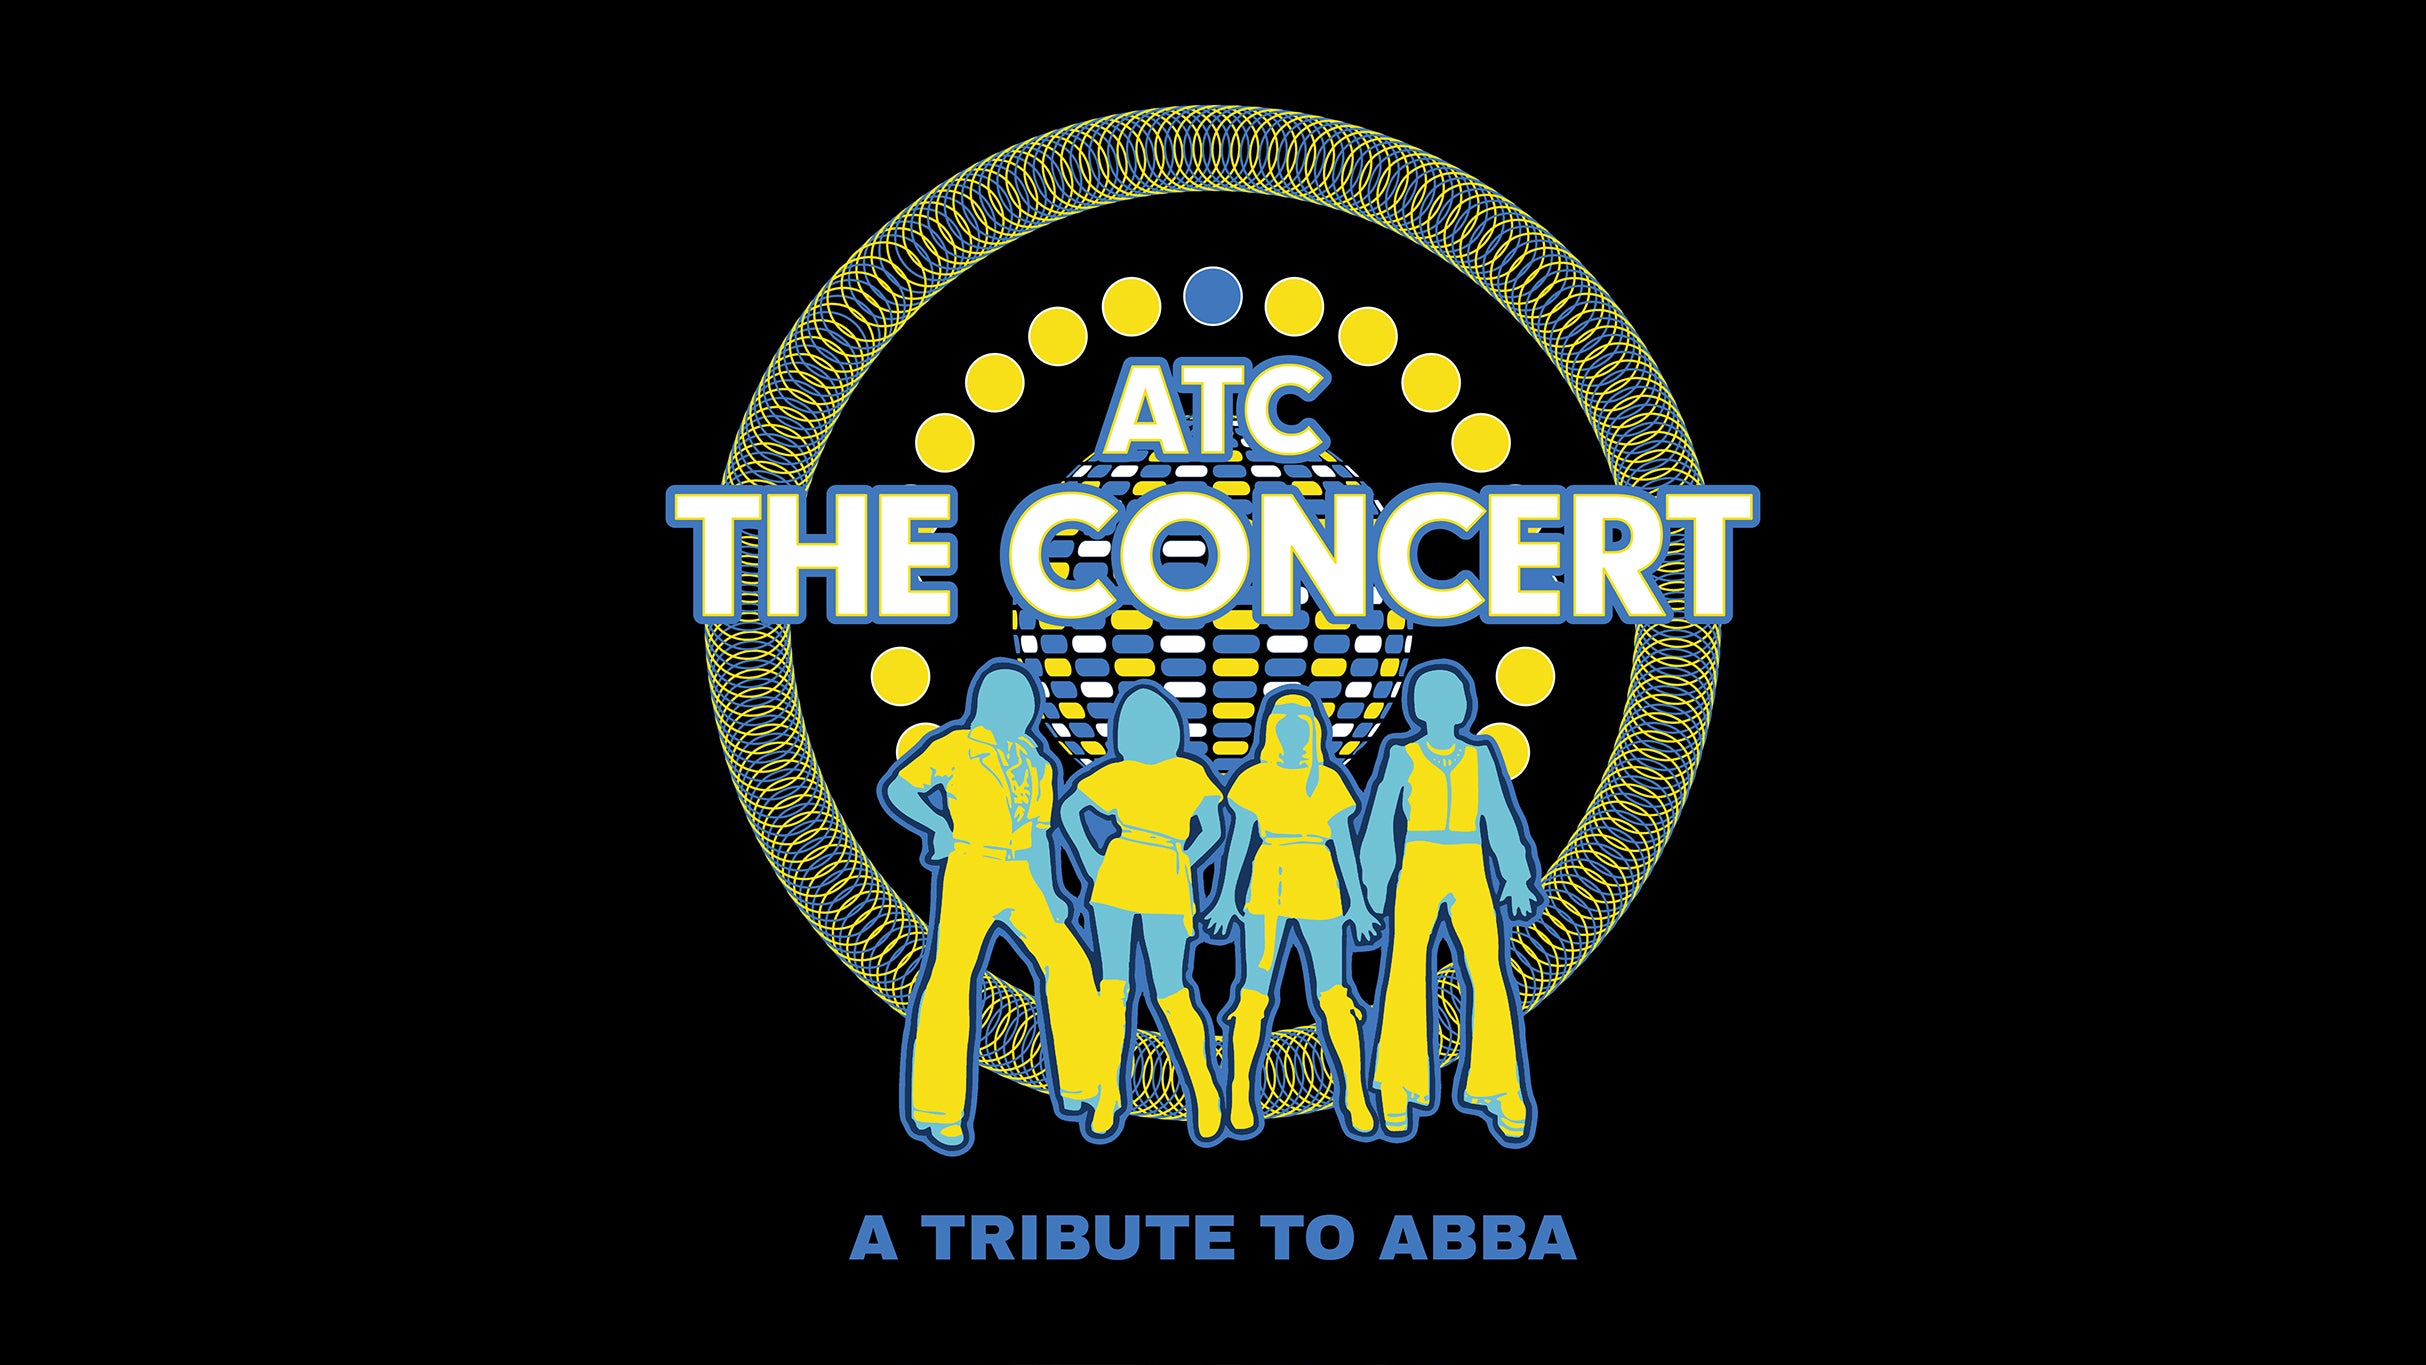 working presale code for The Concert: A Tribute To ABBA affordable tickets in Wallingford